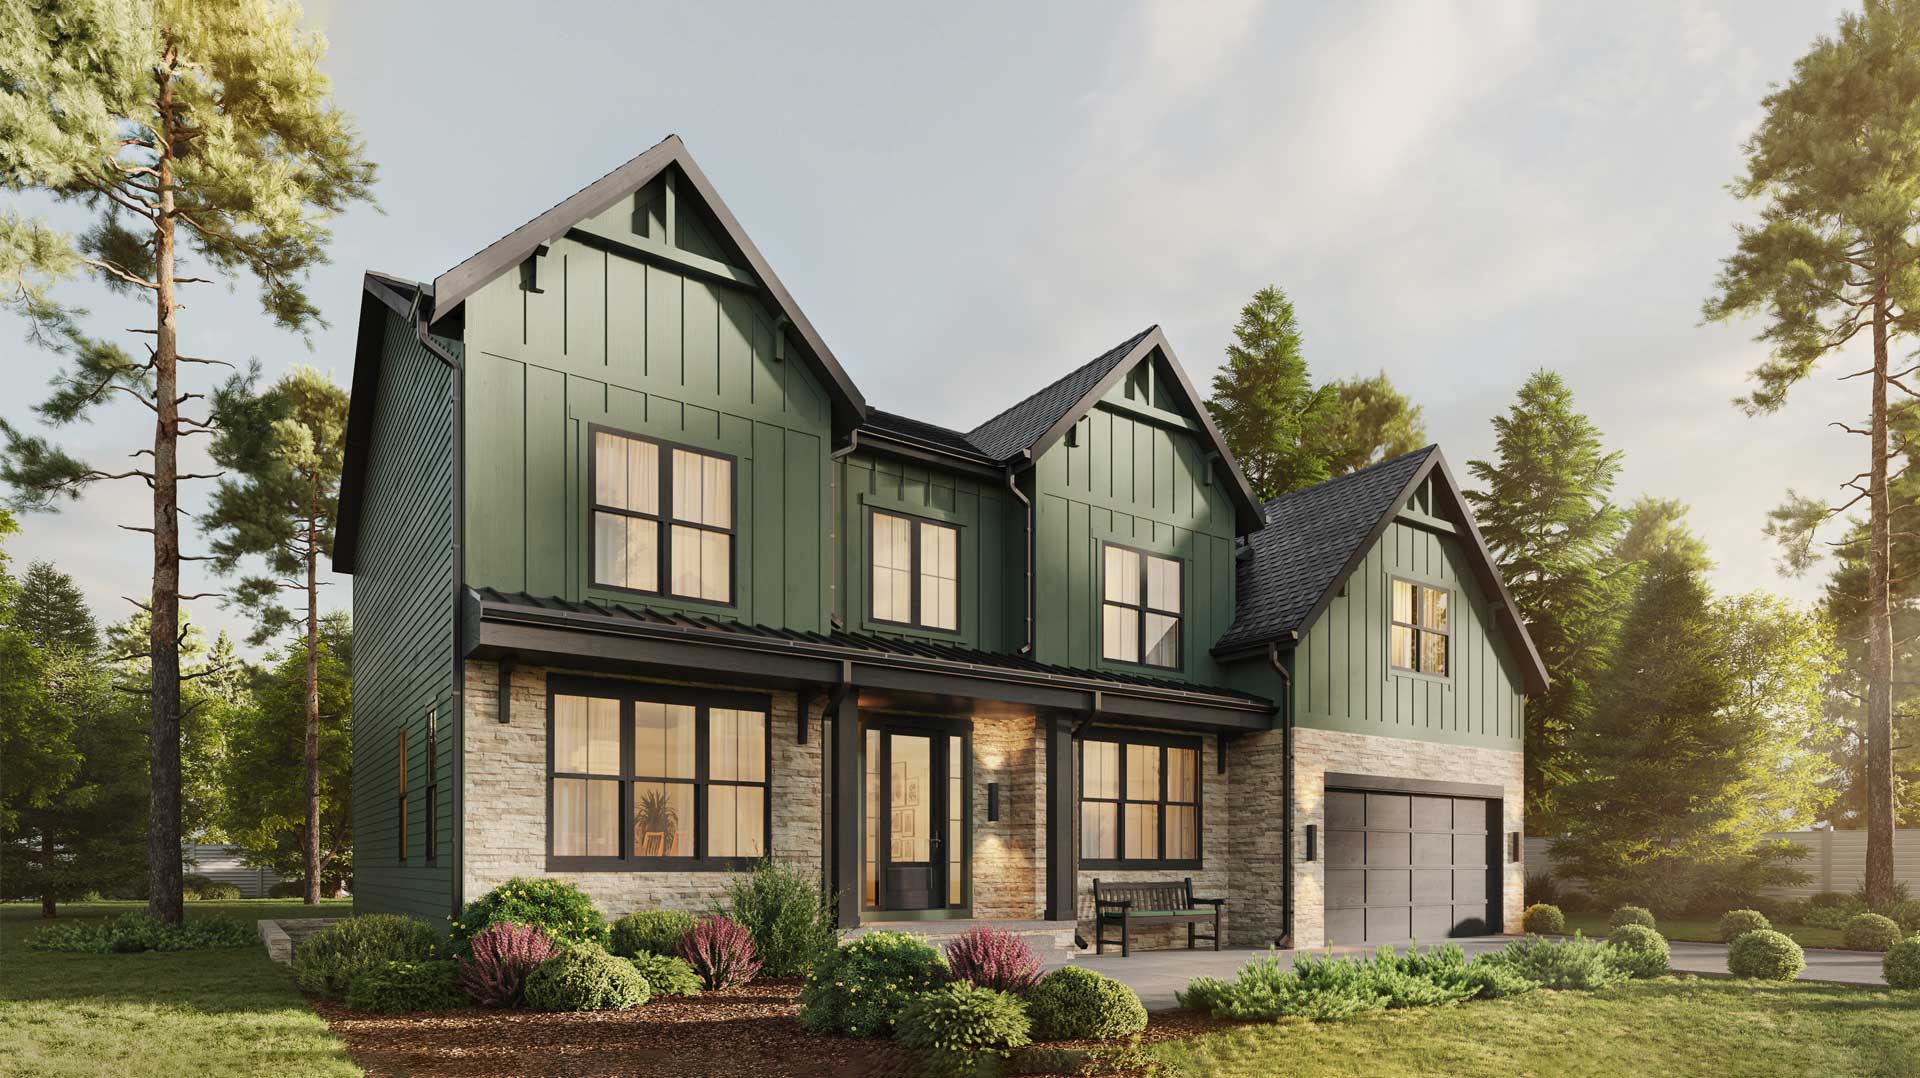 A modern farmhouse with green board and batten, dark brown windows and trim, and ledge stone.